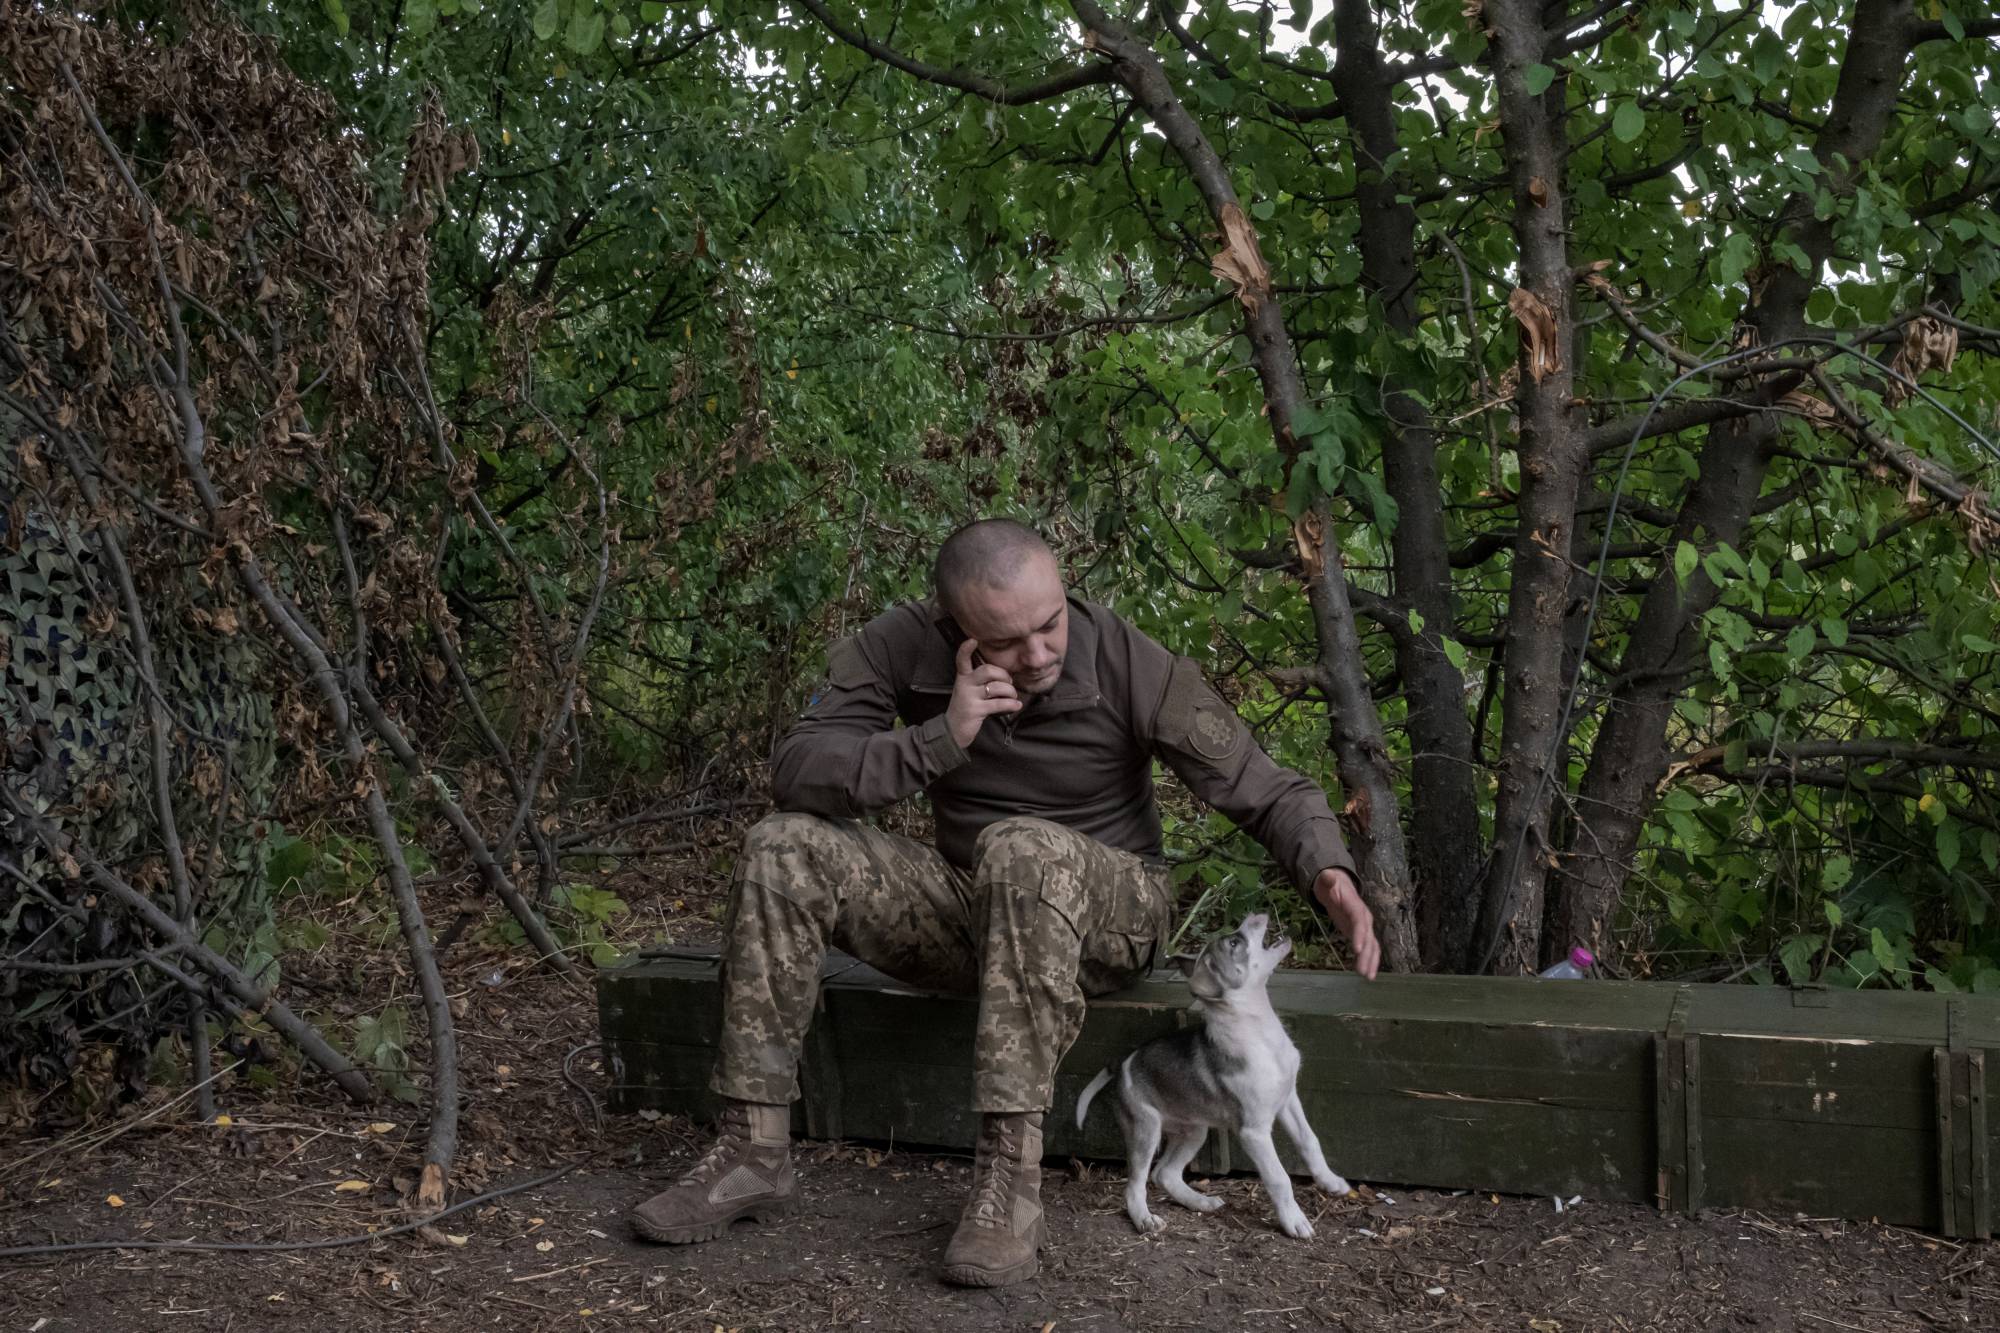 A Ukrainian soldier plays with a puppy as he speaks on his phone near the front lines in the Donetsk region of eastern Ukraine on Thursday. | MAURICIO LIMA / THE NEW YORK TIMES